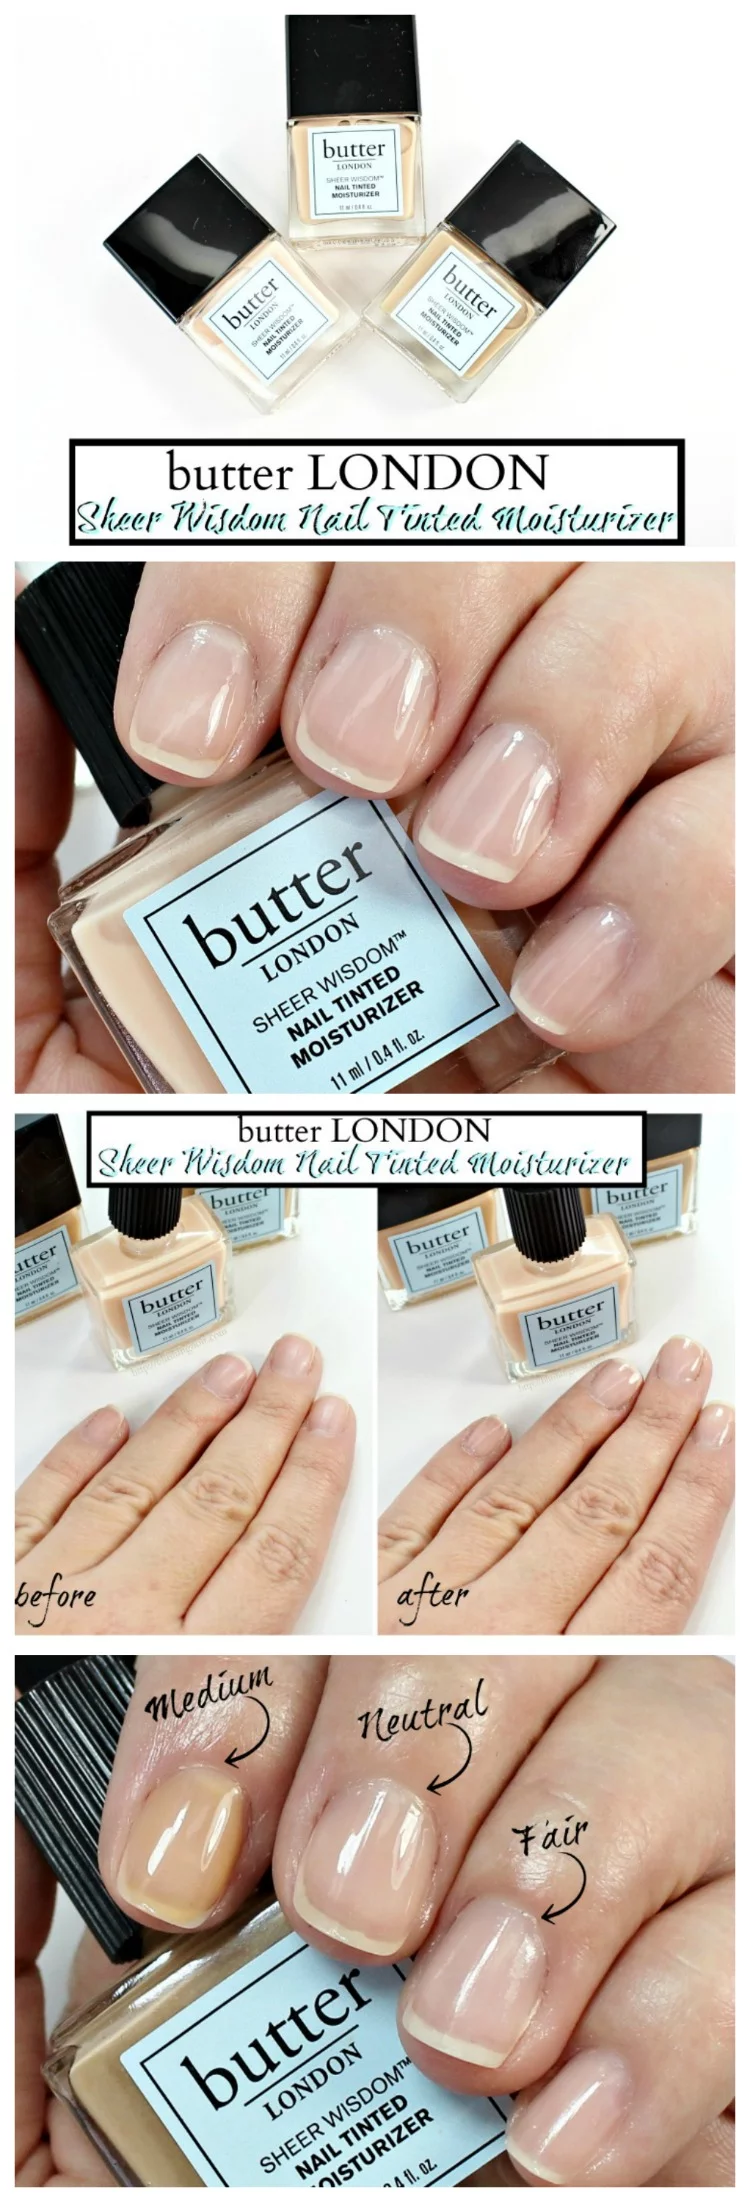 butter LONDON Sheer Wisdom Nail Tinted Moisturizer swatches review photos how to